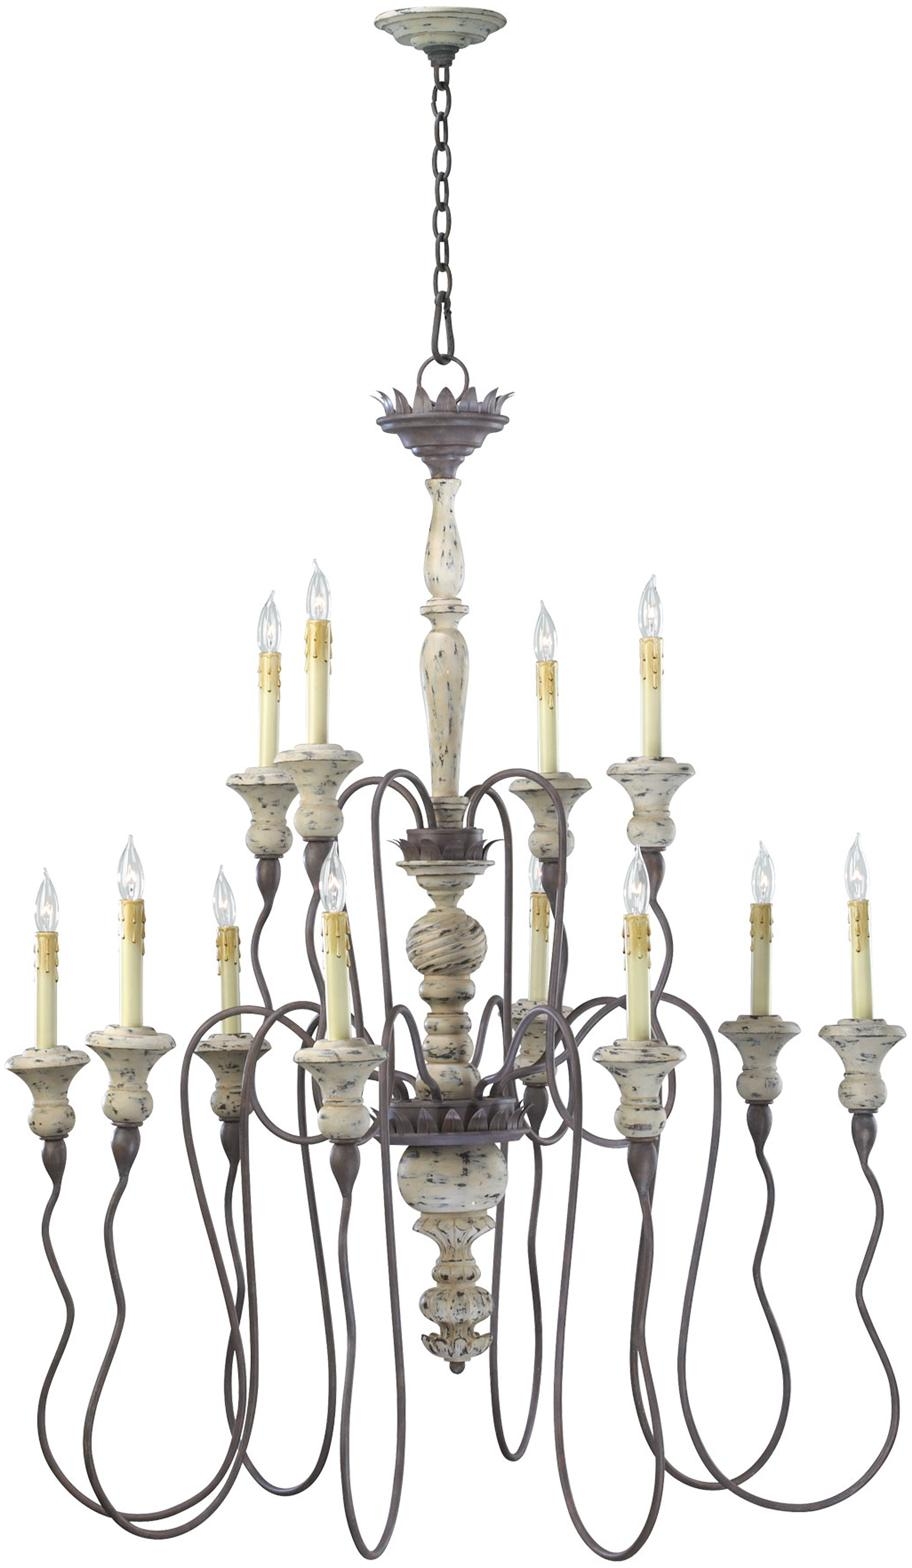 Chandelier CYAN DESIGN PROVENCE 14-Light Carriage House Resin Wrought Iron-Image 1